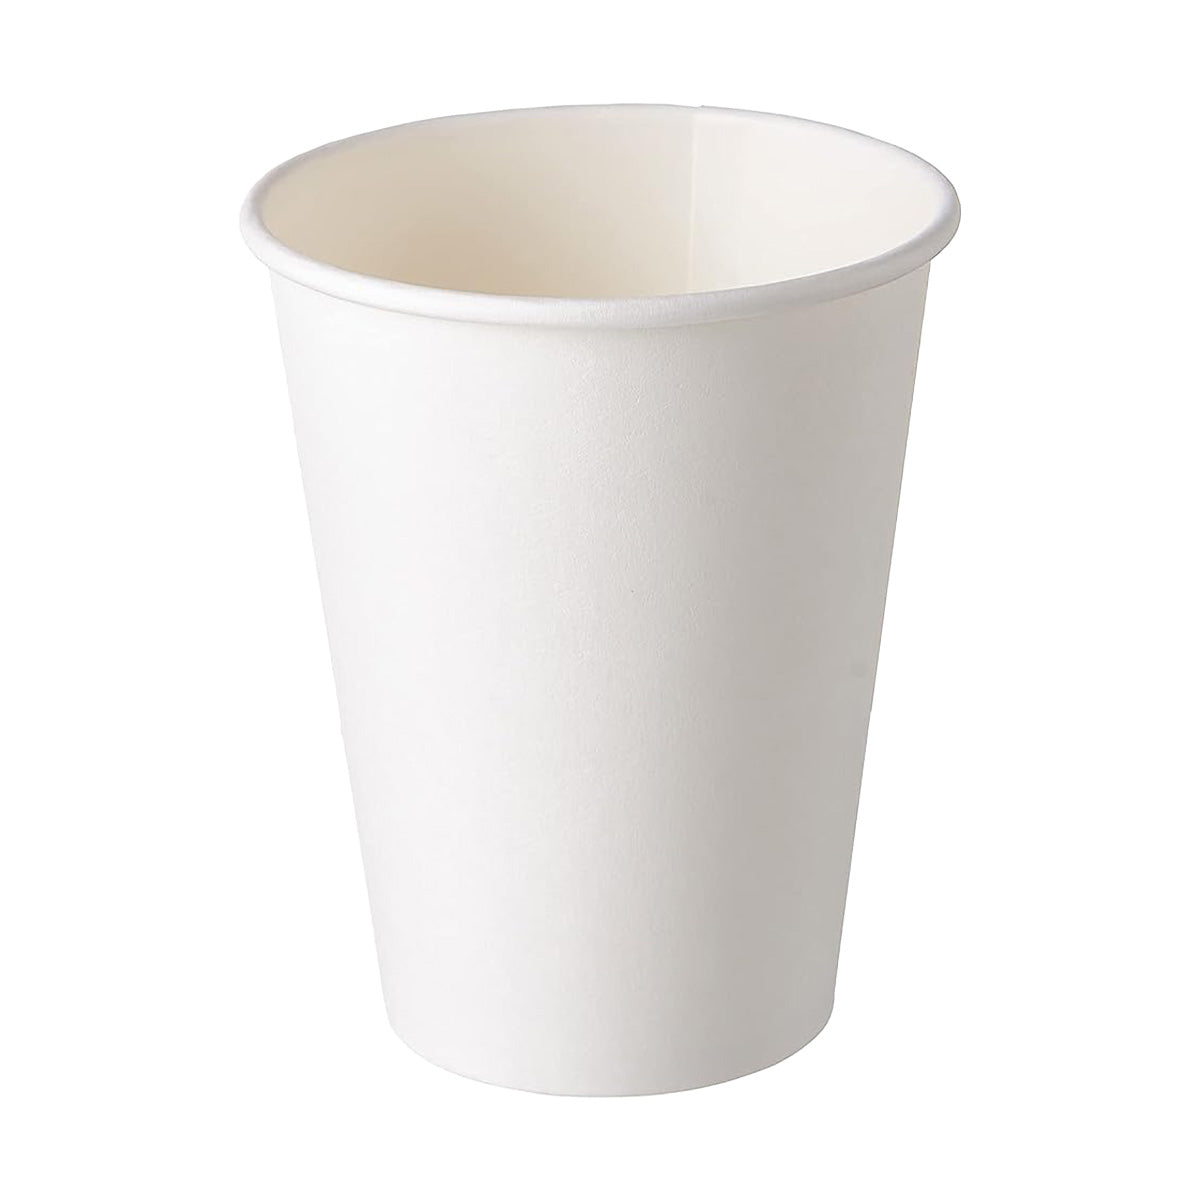 Ciao! Paper Hot Cup, 12 oz Disposable Cup, White, 1,000 Count